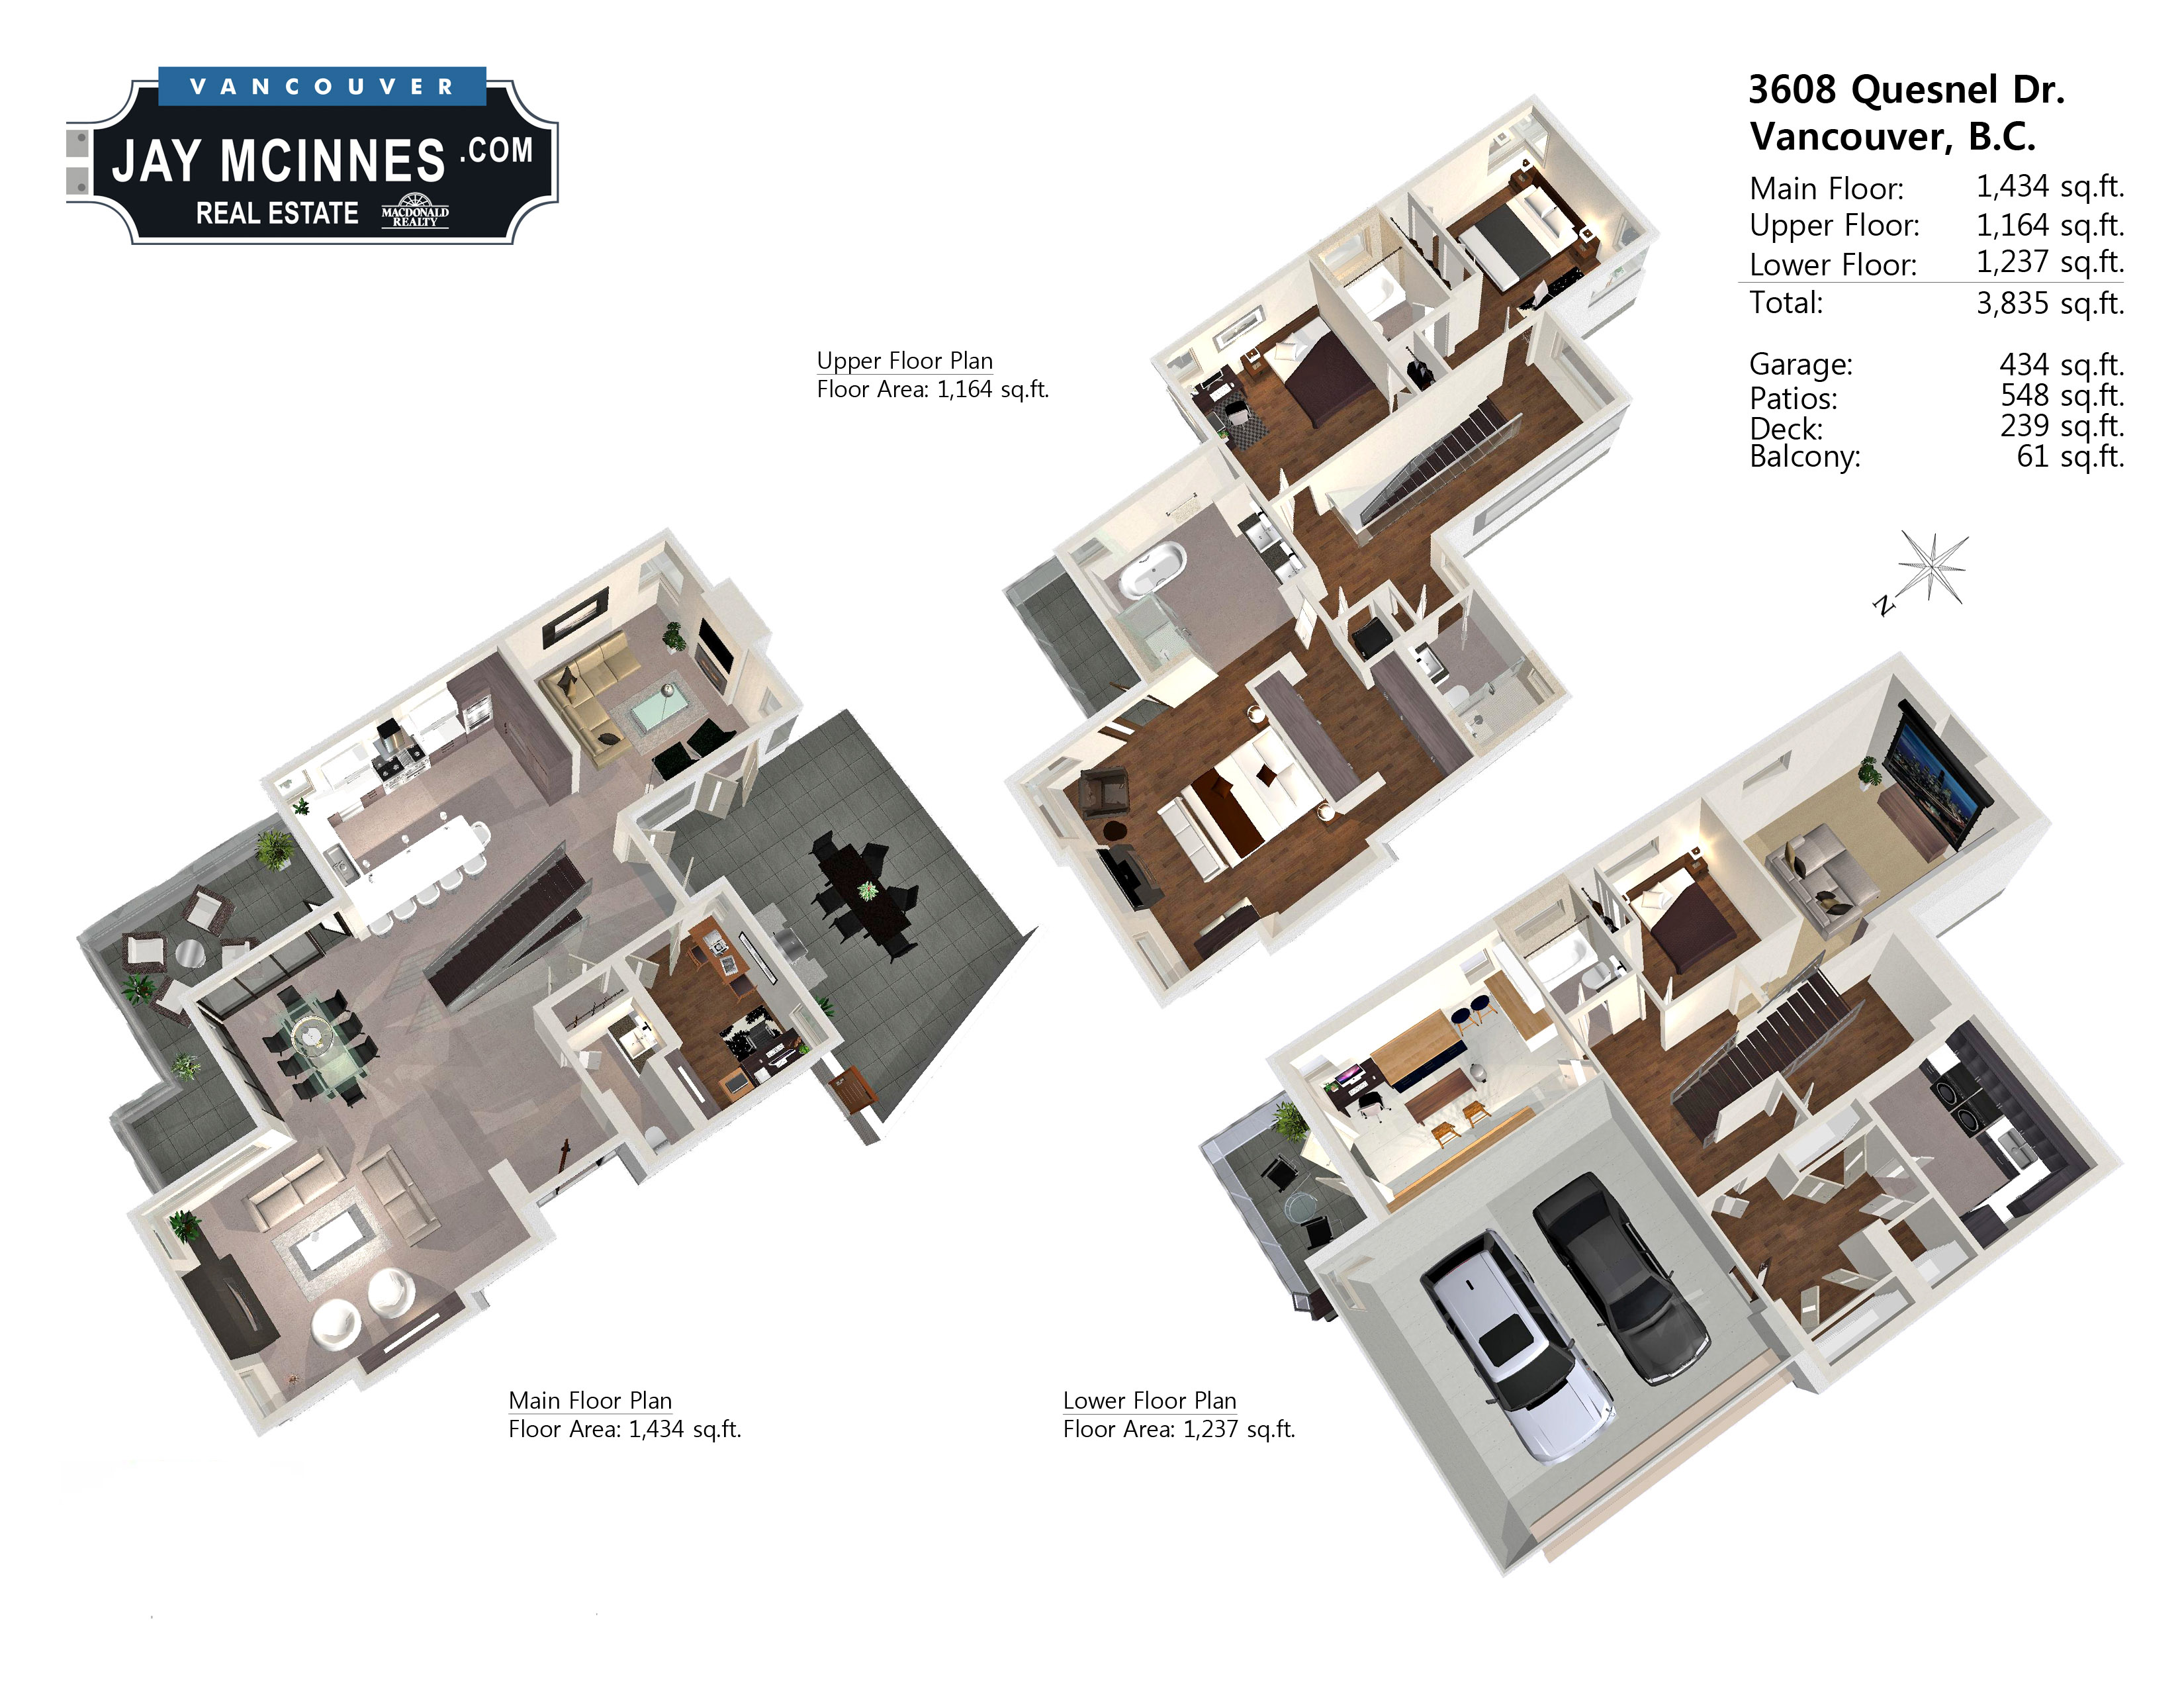 3d house plan drawing software free download